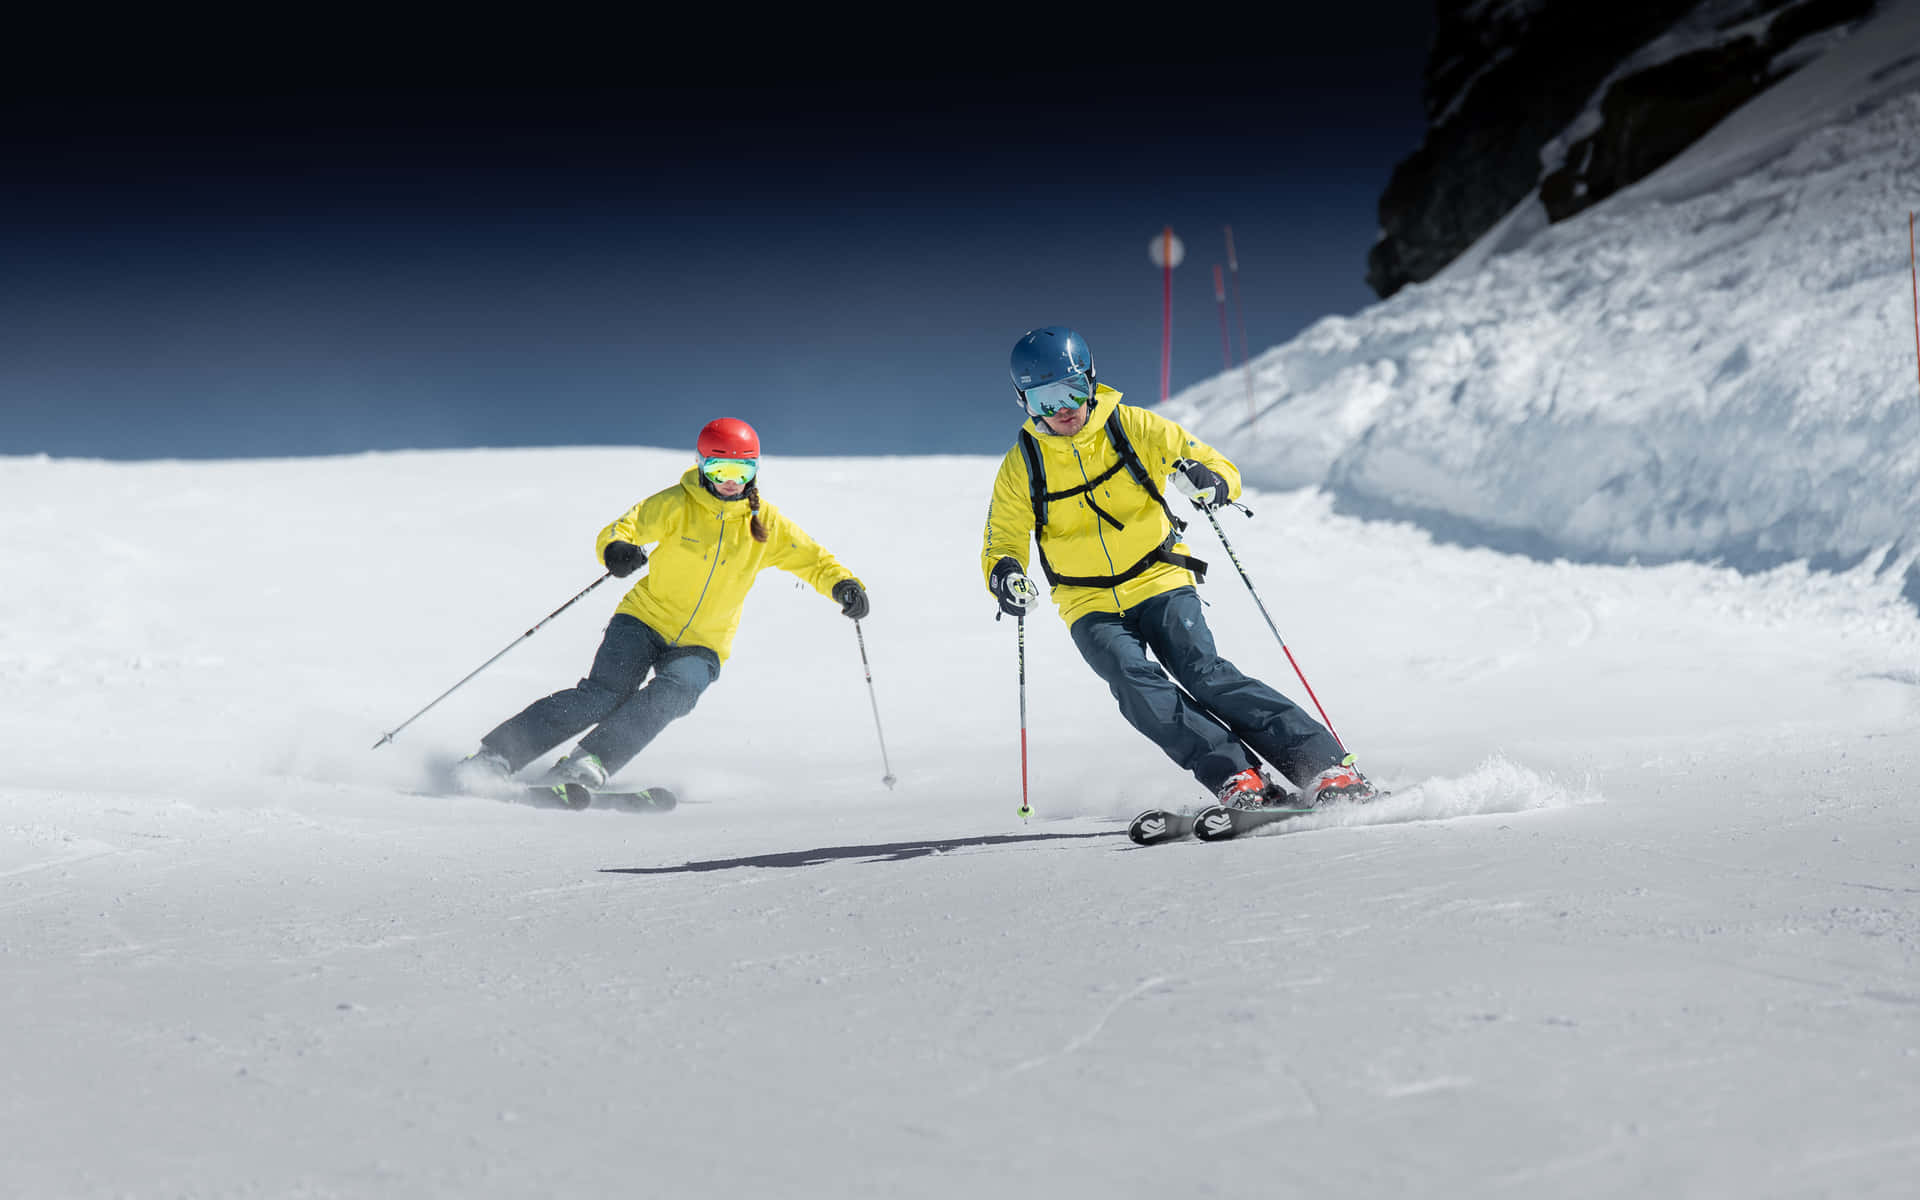 High Altitude Skiing Reaches New Heights